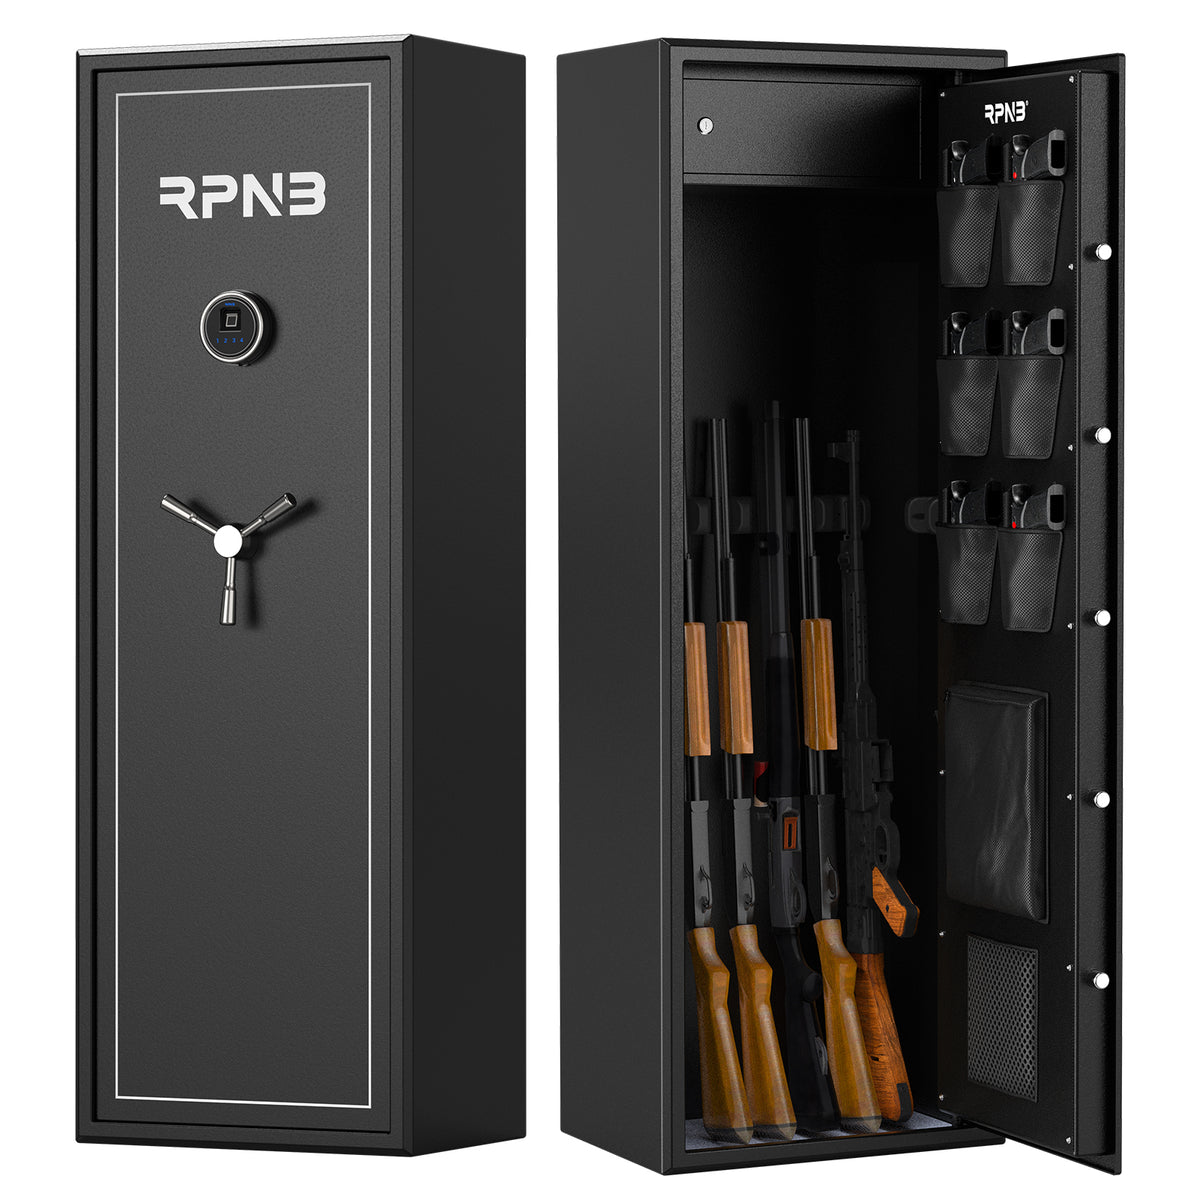 RPNB RP10FR Biometric Large 10 Gun Cabinet with Electronic Digital Lock Door Open with Rifles